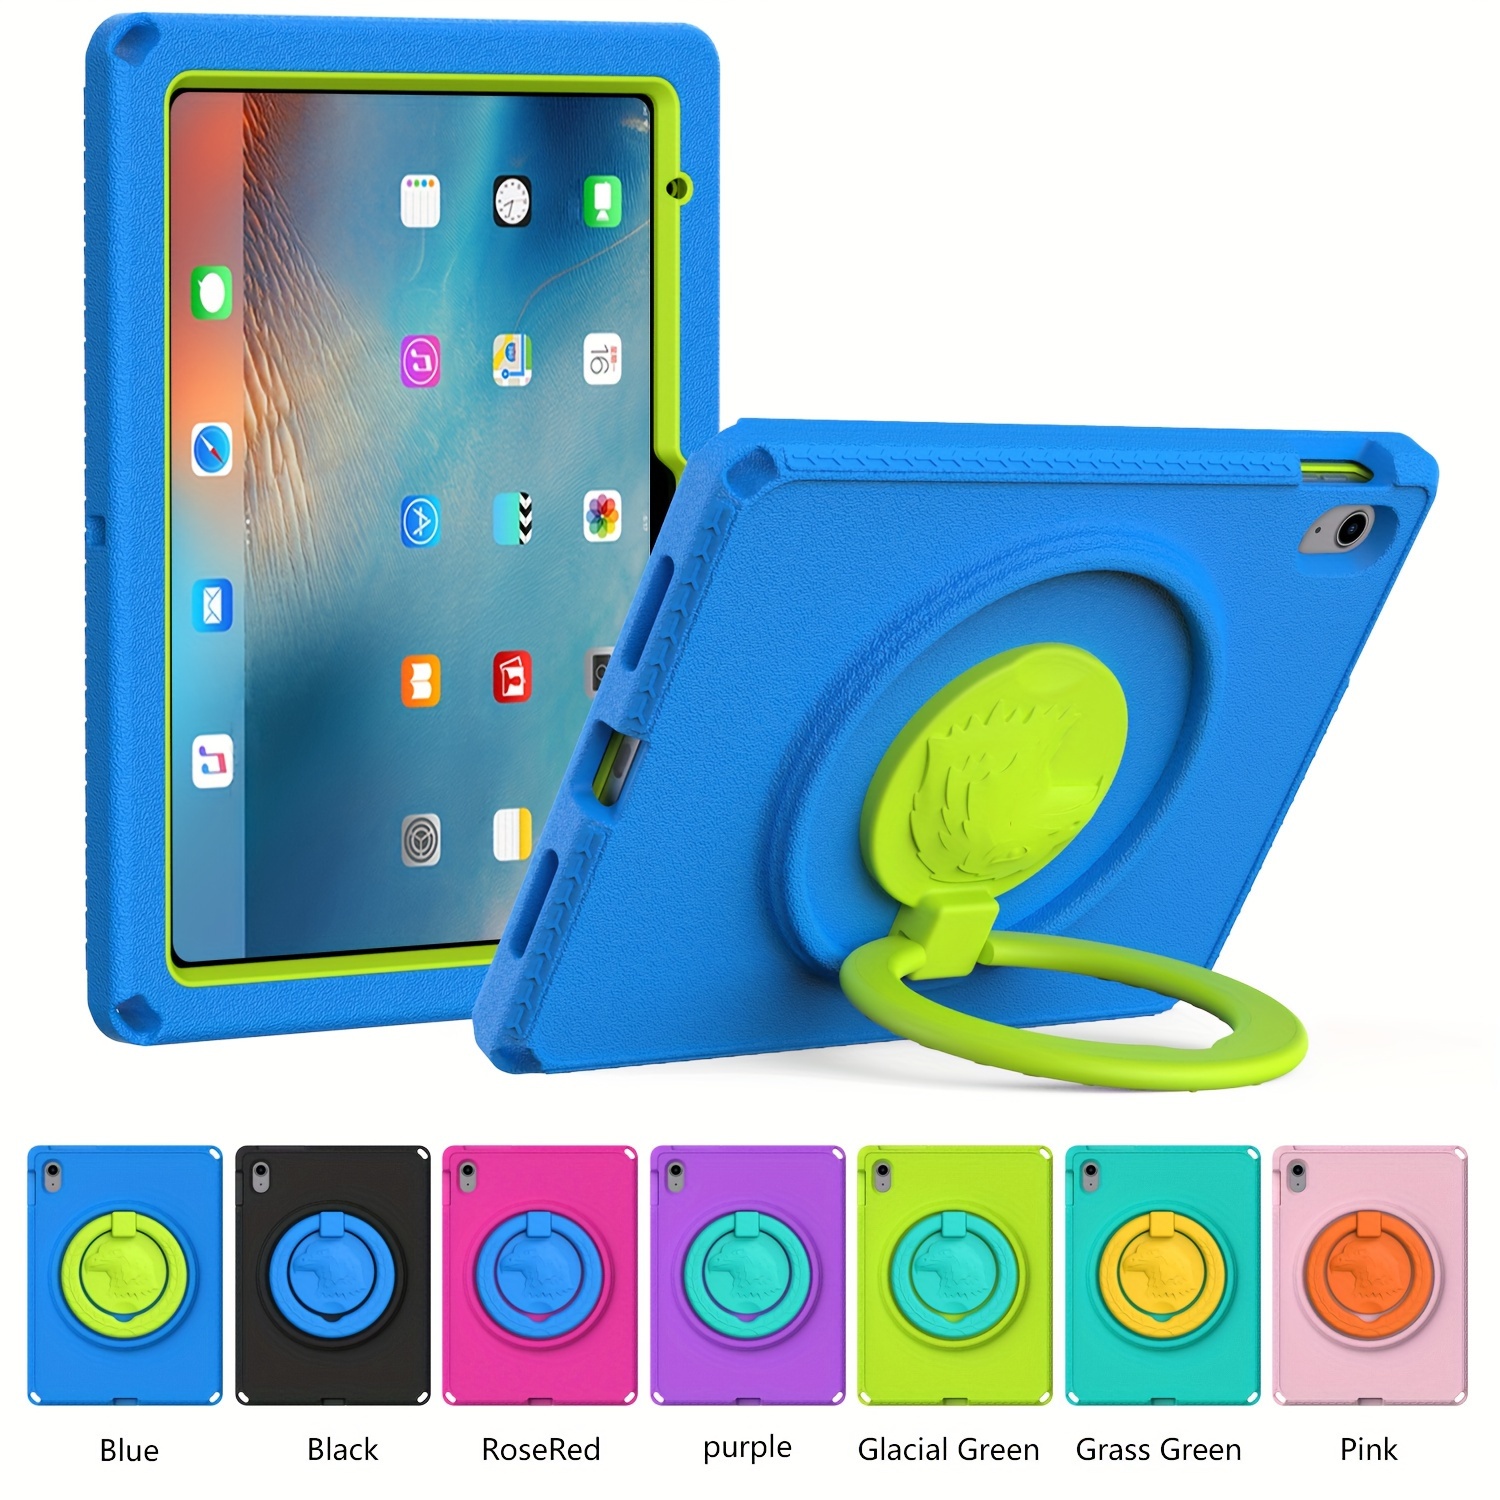 For Ipad 10th Generation Protective Case In 2022 For Ipad - Temu